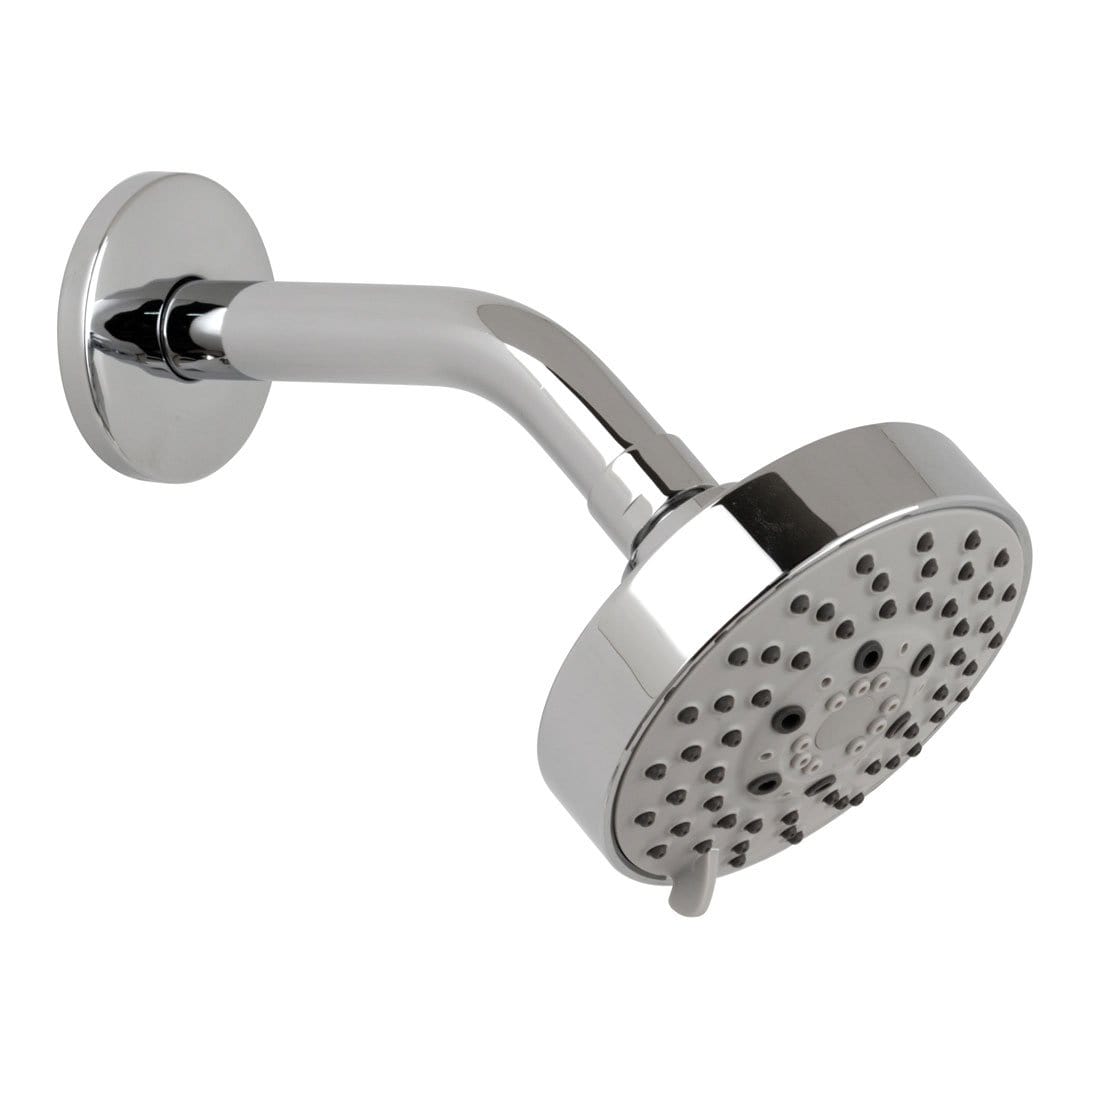 Vado 5 Function Fixed Shower Head With Arm - WG-MFKIT2-C/P | Supply Master | Accra, Ghana Building Material Building Steel Engineering Hardware tool